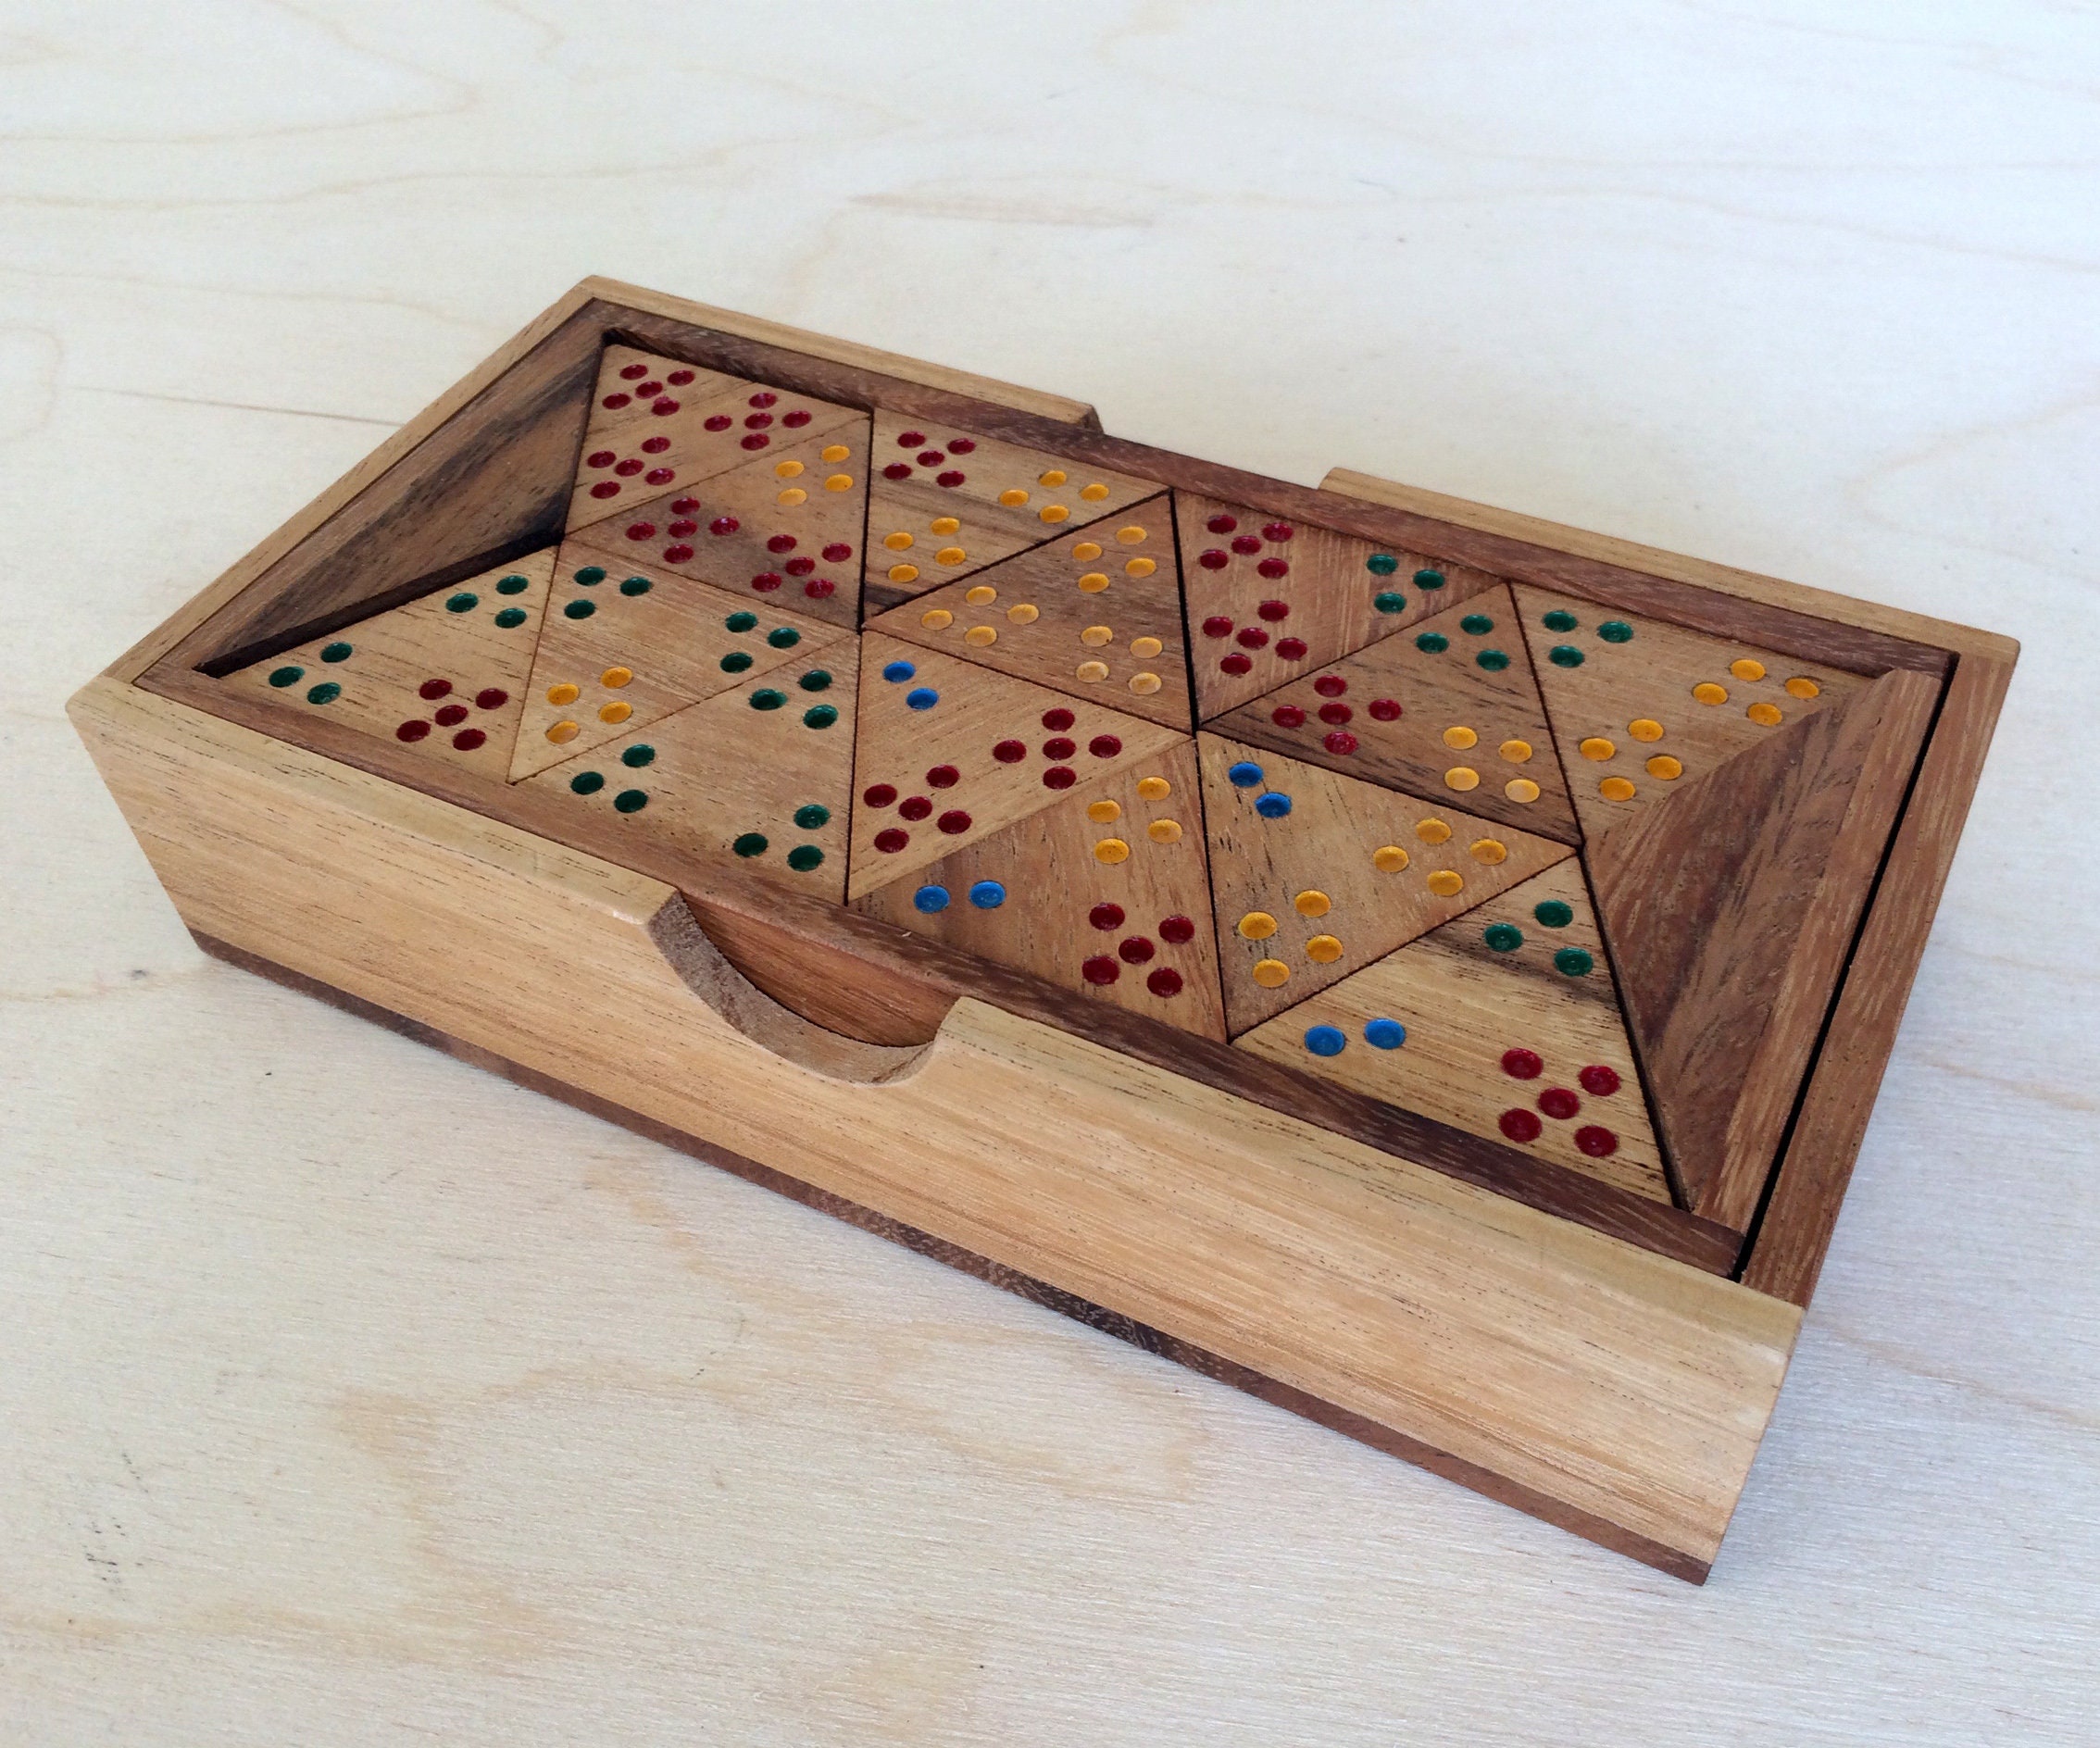  Bits and Pieces - Mikado Rules Wooden Board Game-A